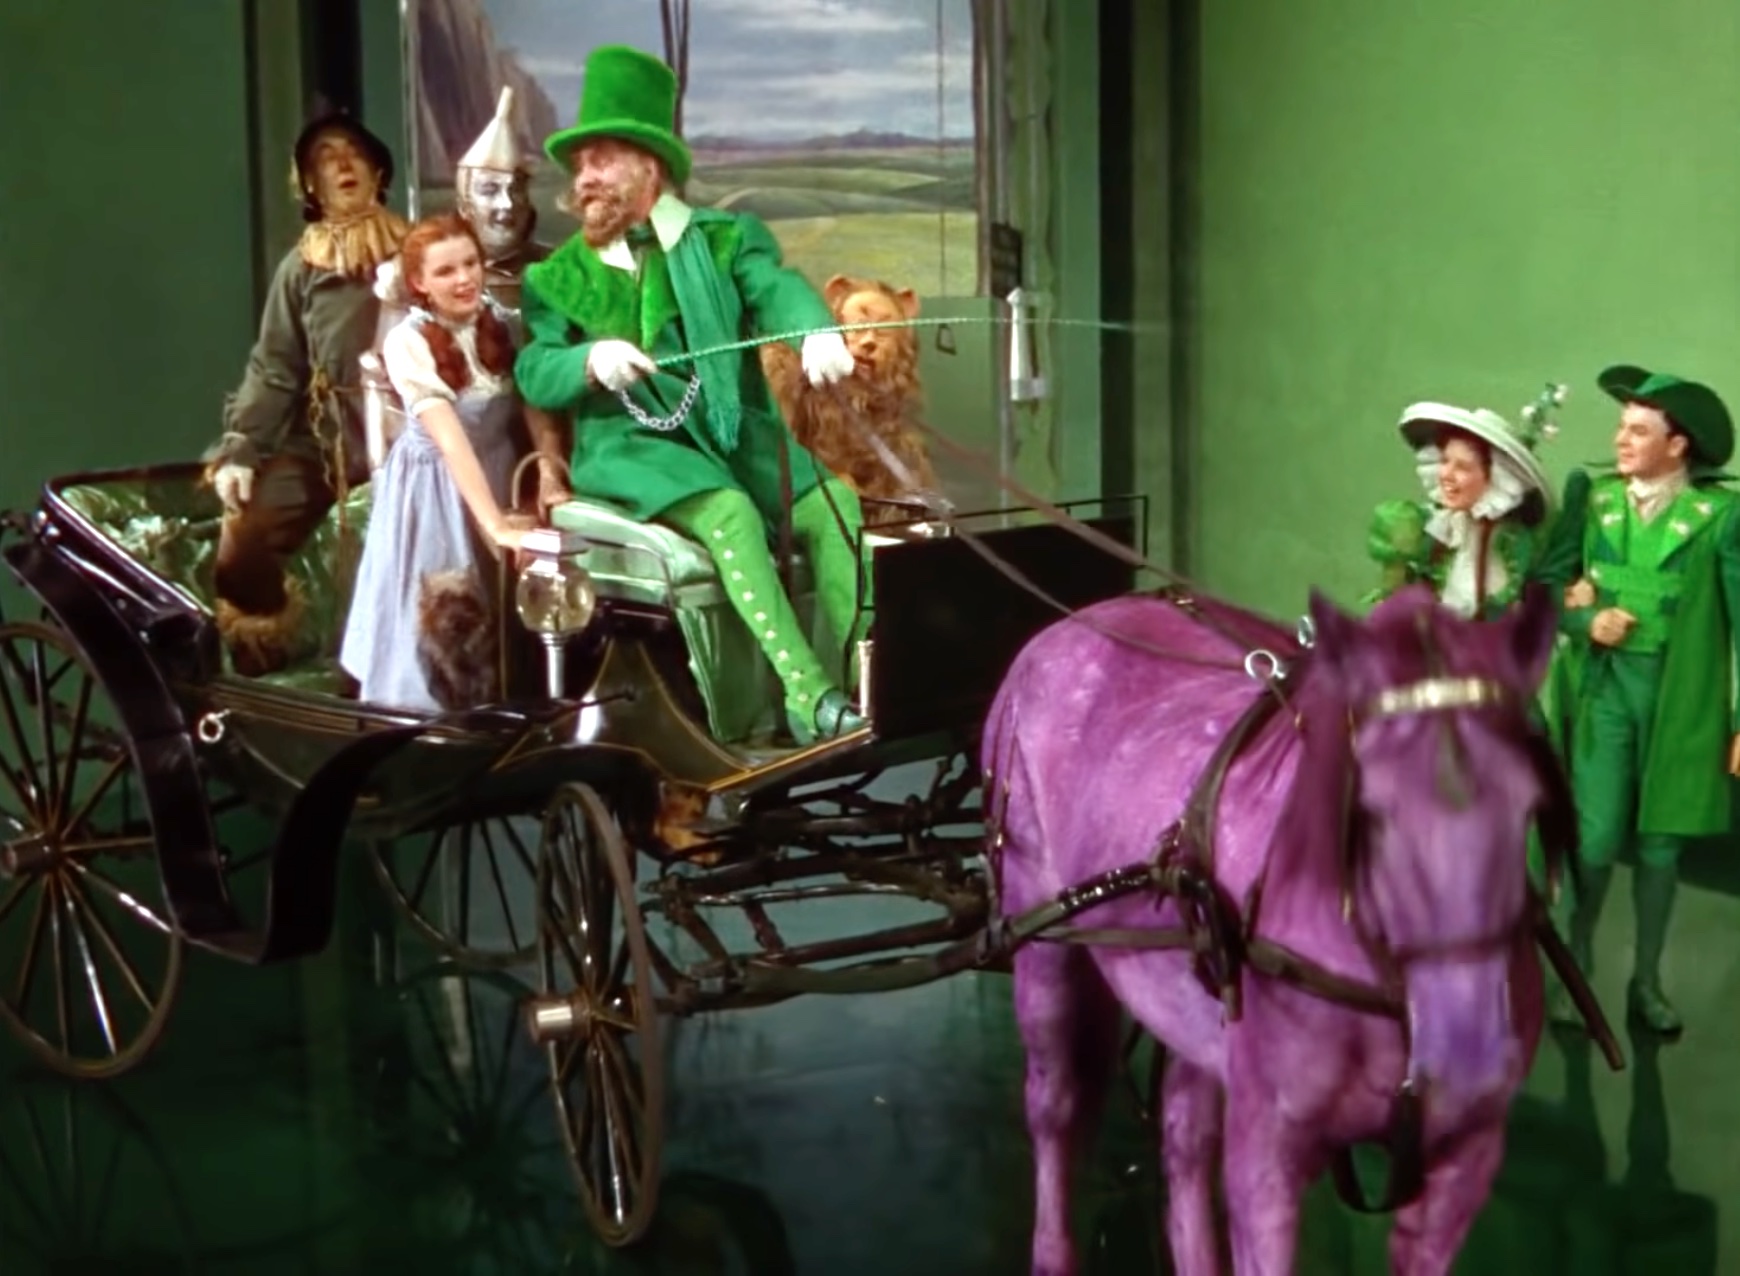 Song Lyrics to The Merry Old Land Of Oz. Performed in The Wizard of Oz , Lyrics by E.Y. Harburg, Music by Harold Arlen